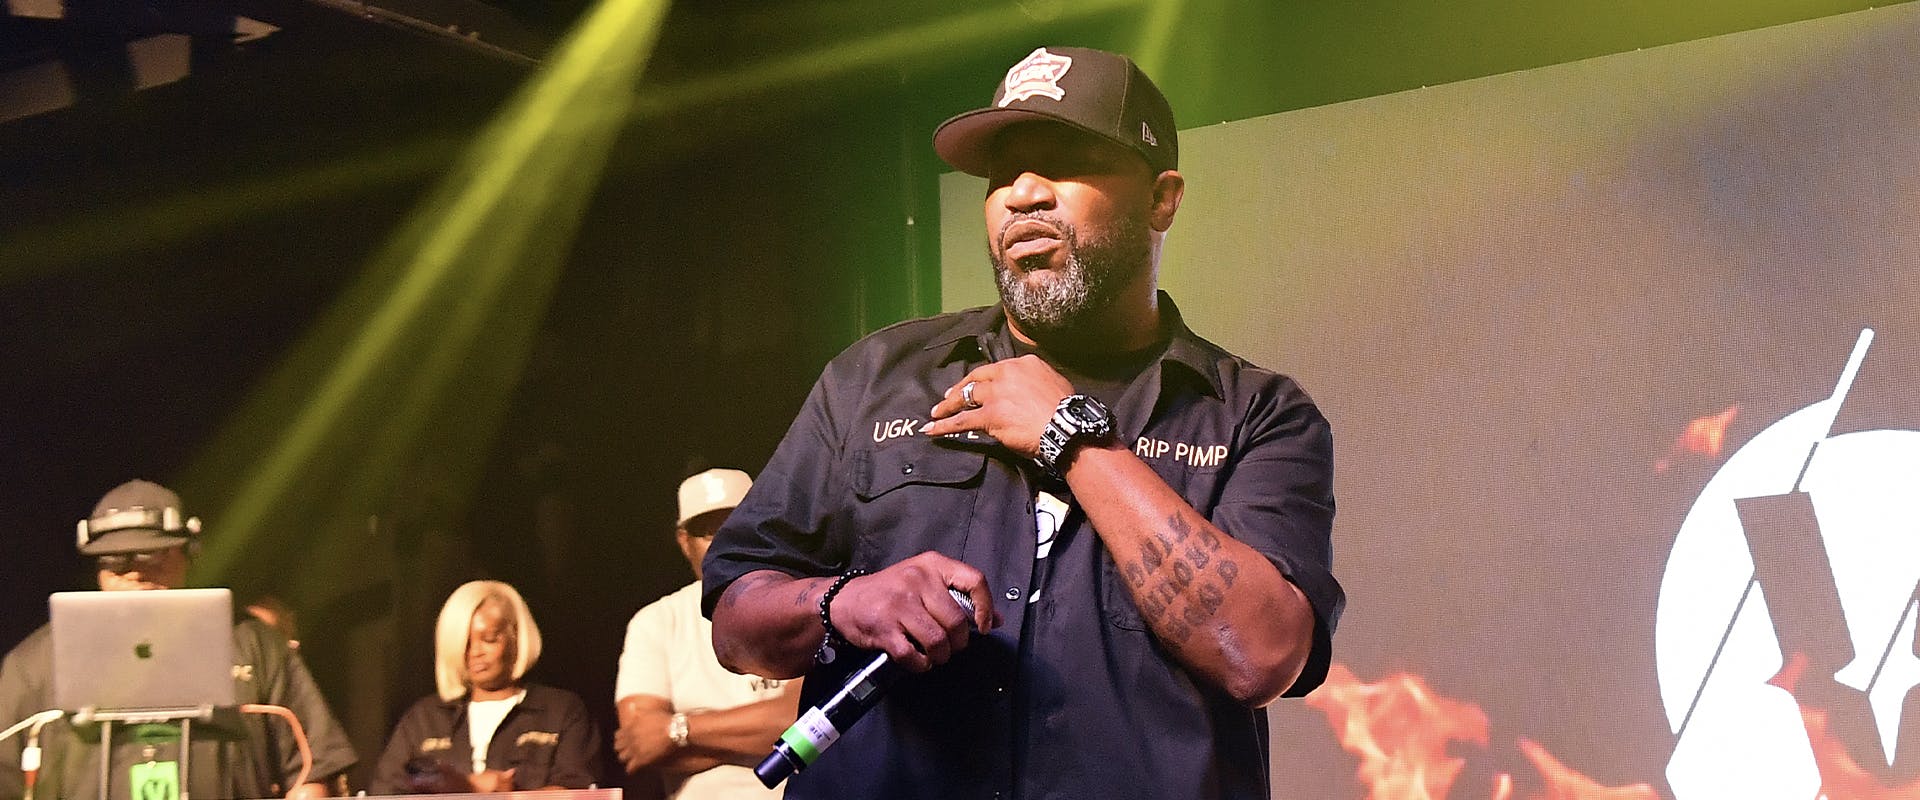 Bun B of UGK perform onstage during VERZUZ 8 Ball & MJG vs UGK at Terminal West on May 26, 2022 in Atlanta, Georgia. (Photo by Paras Griffin/Getty Images)